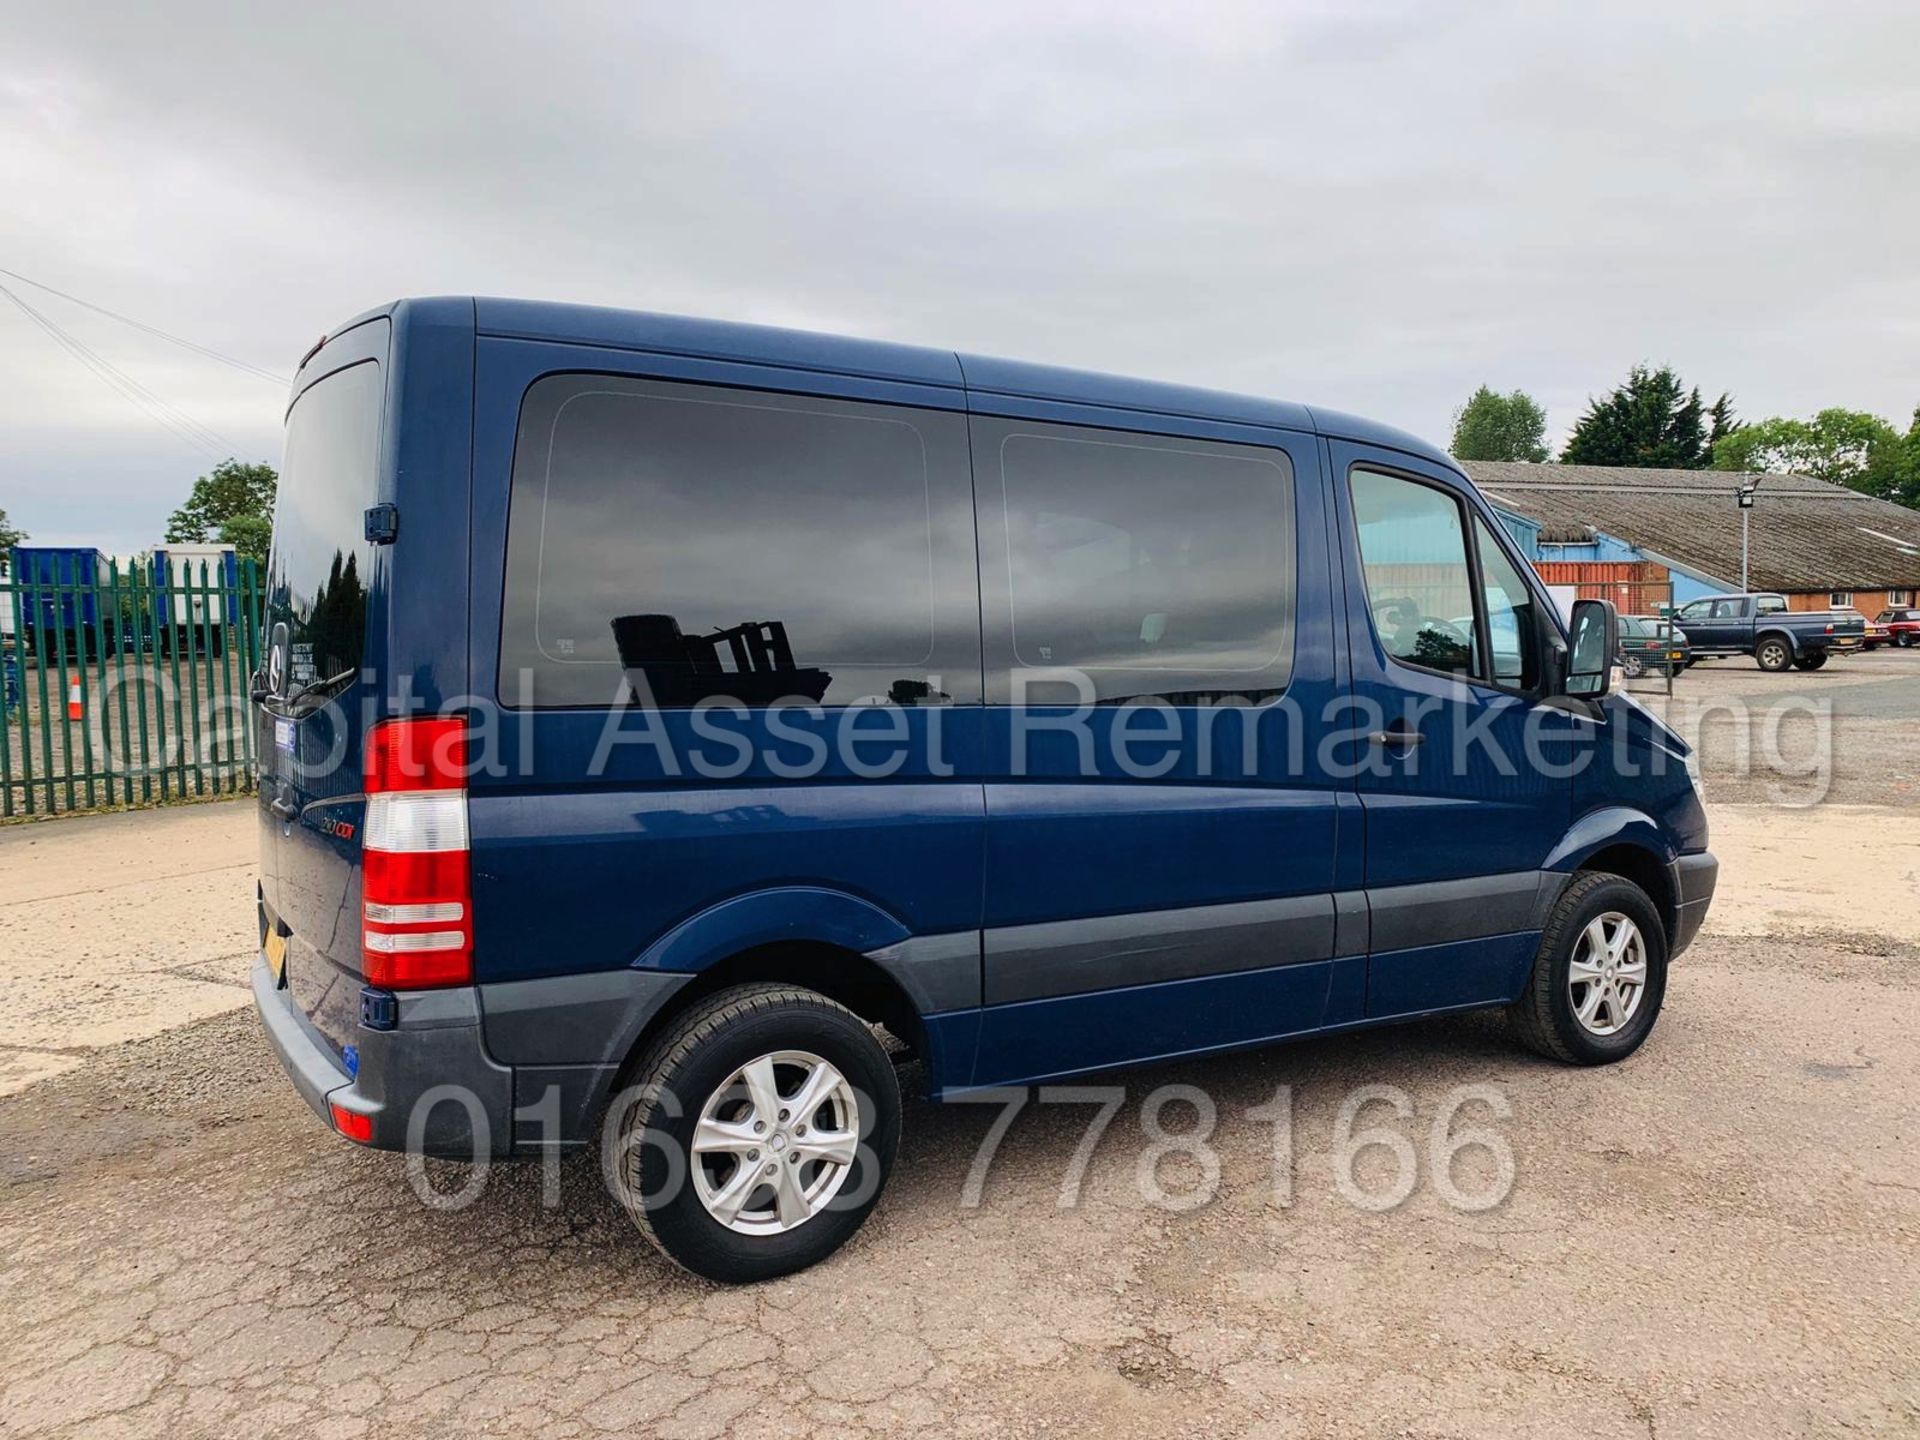 On Sale MERCEDES-BENZ SPRINTER -DISABILITY VEHICLE)2012 MODEL AUTO- DISABILITY CONTROLS' (12K MILES) - Image 16 of 43